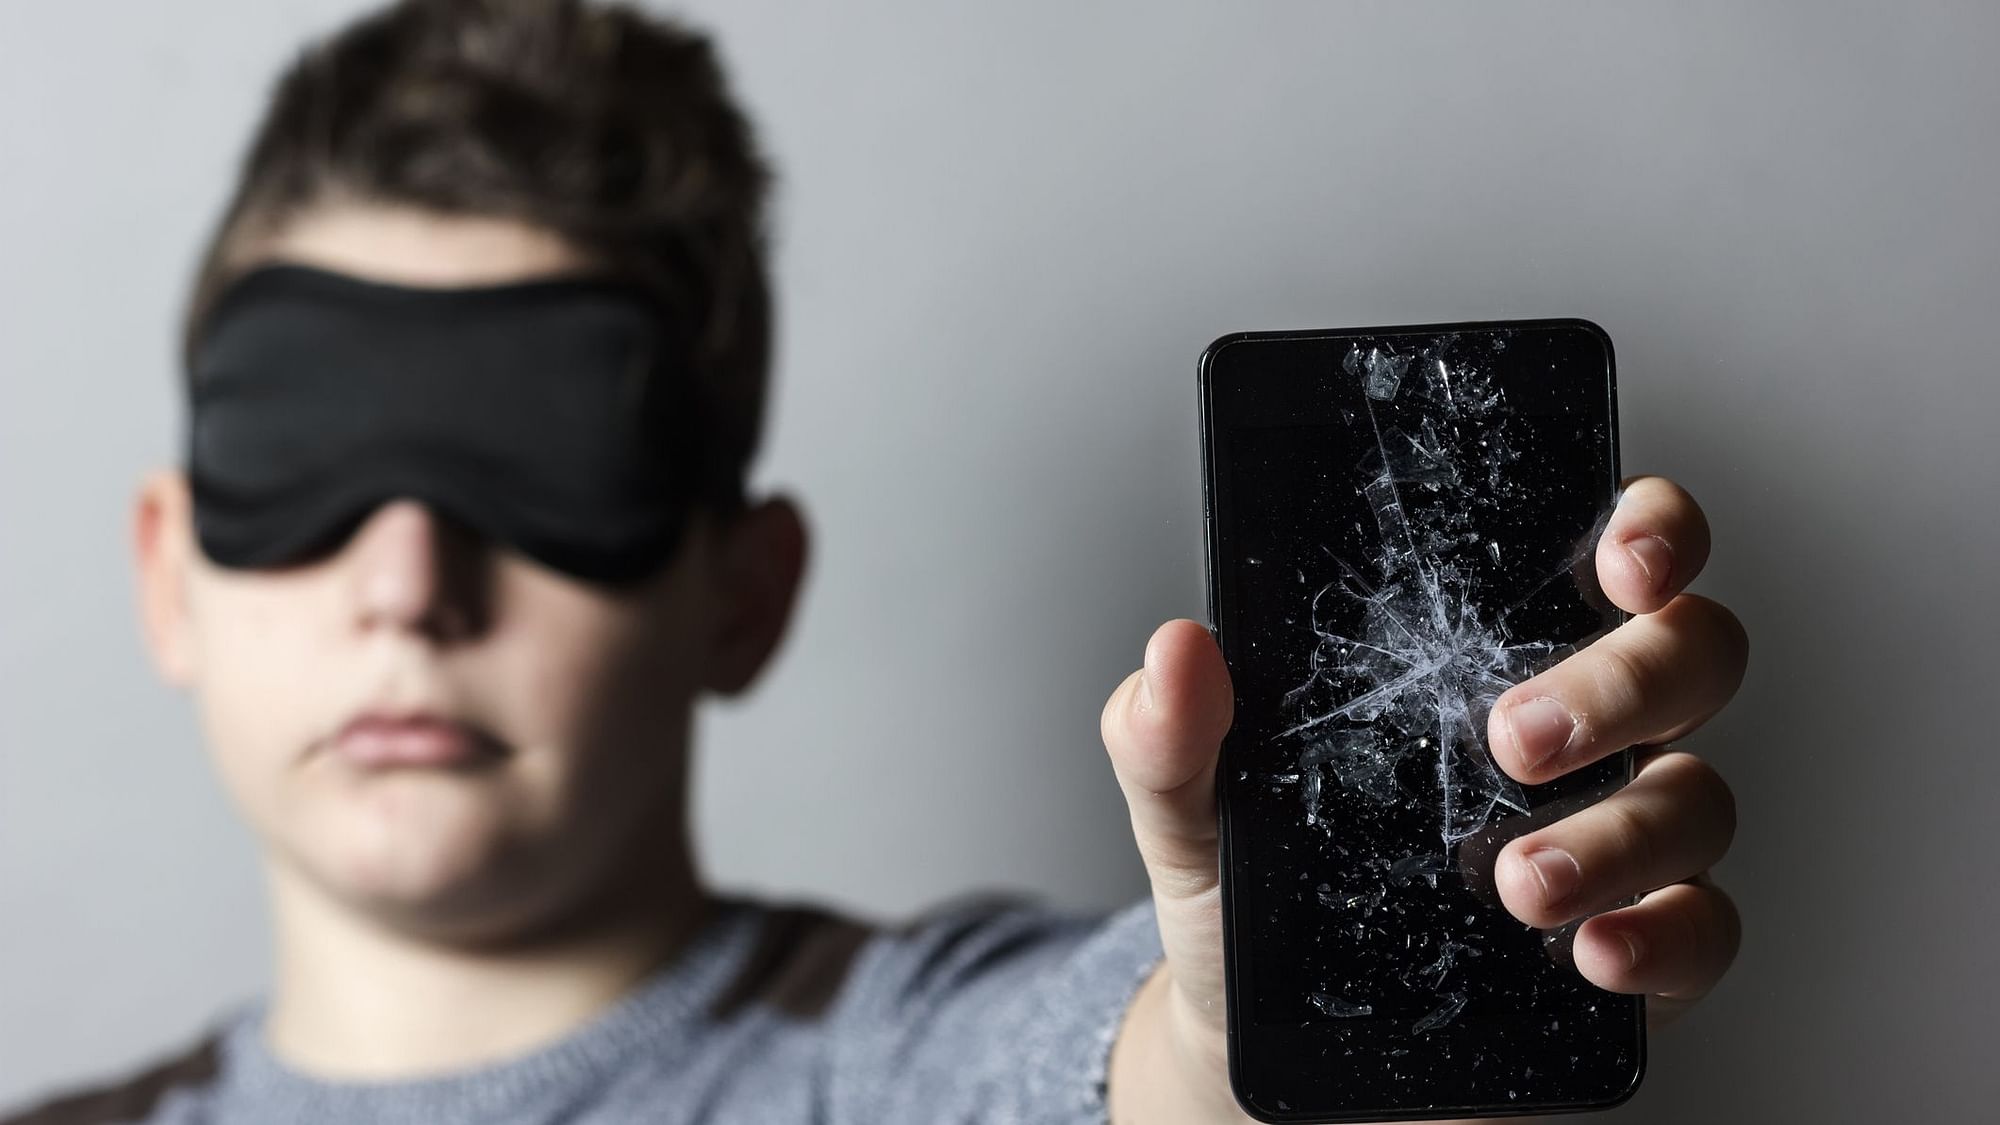 Ever wondered how will you explain an image from your phone to a blind man?